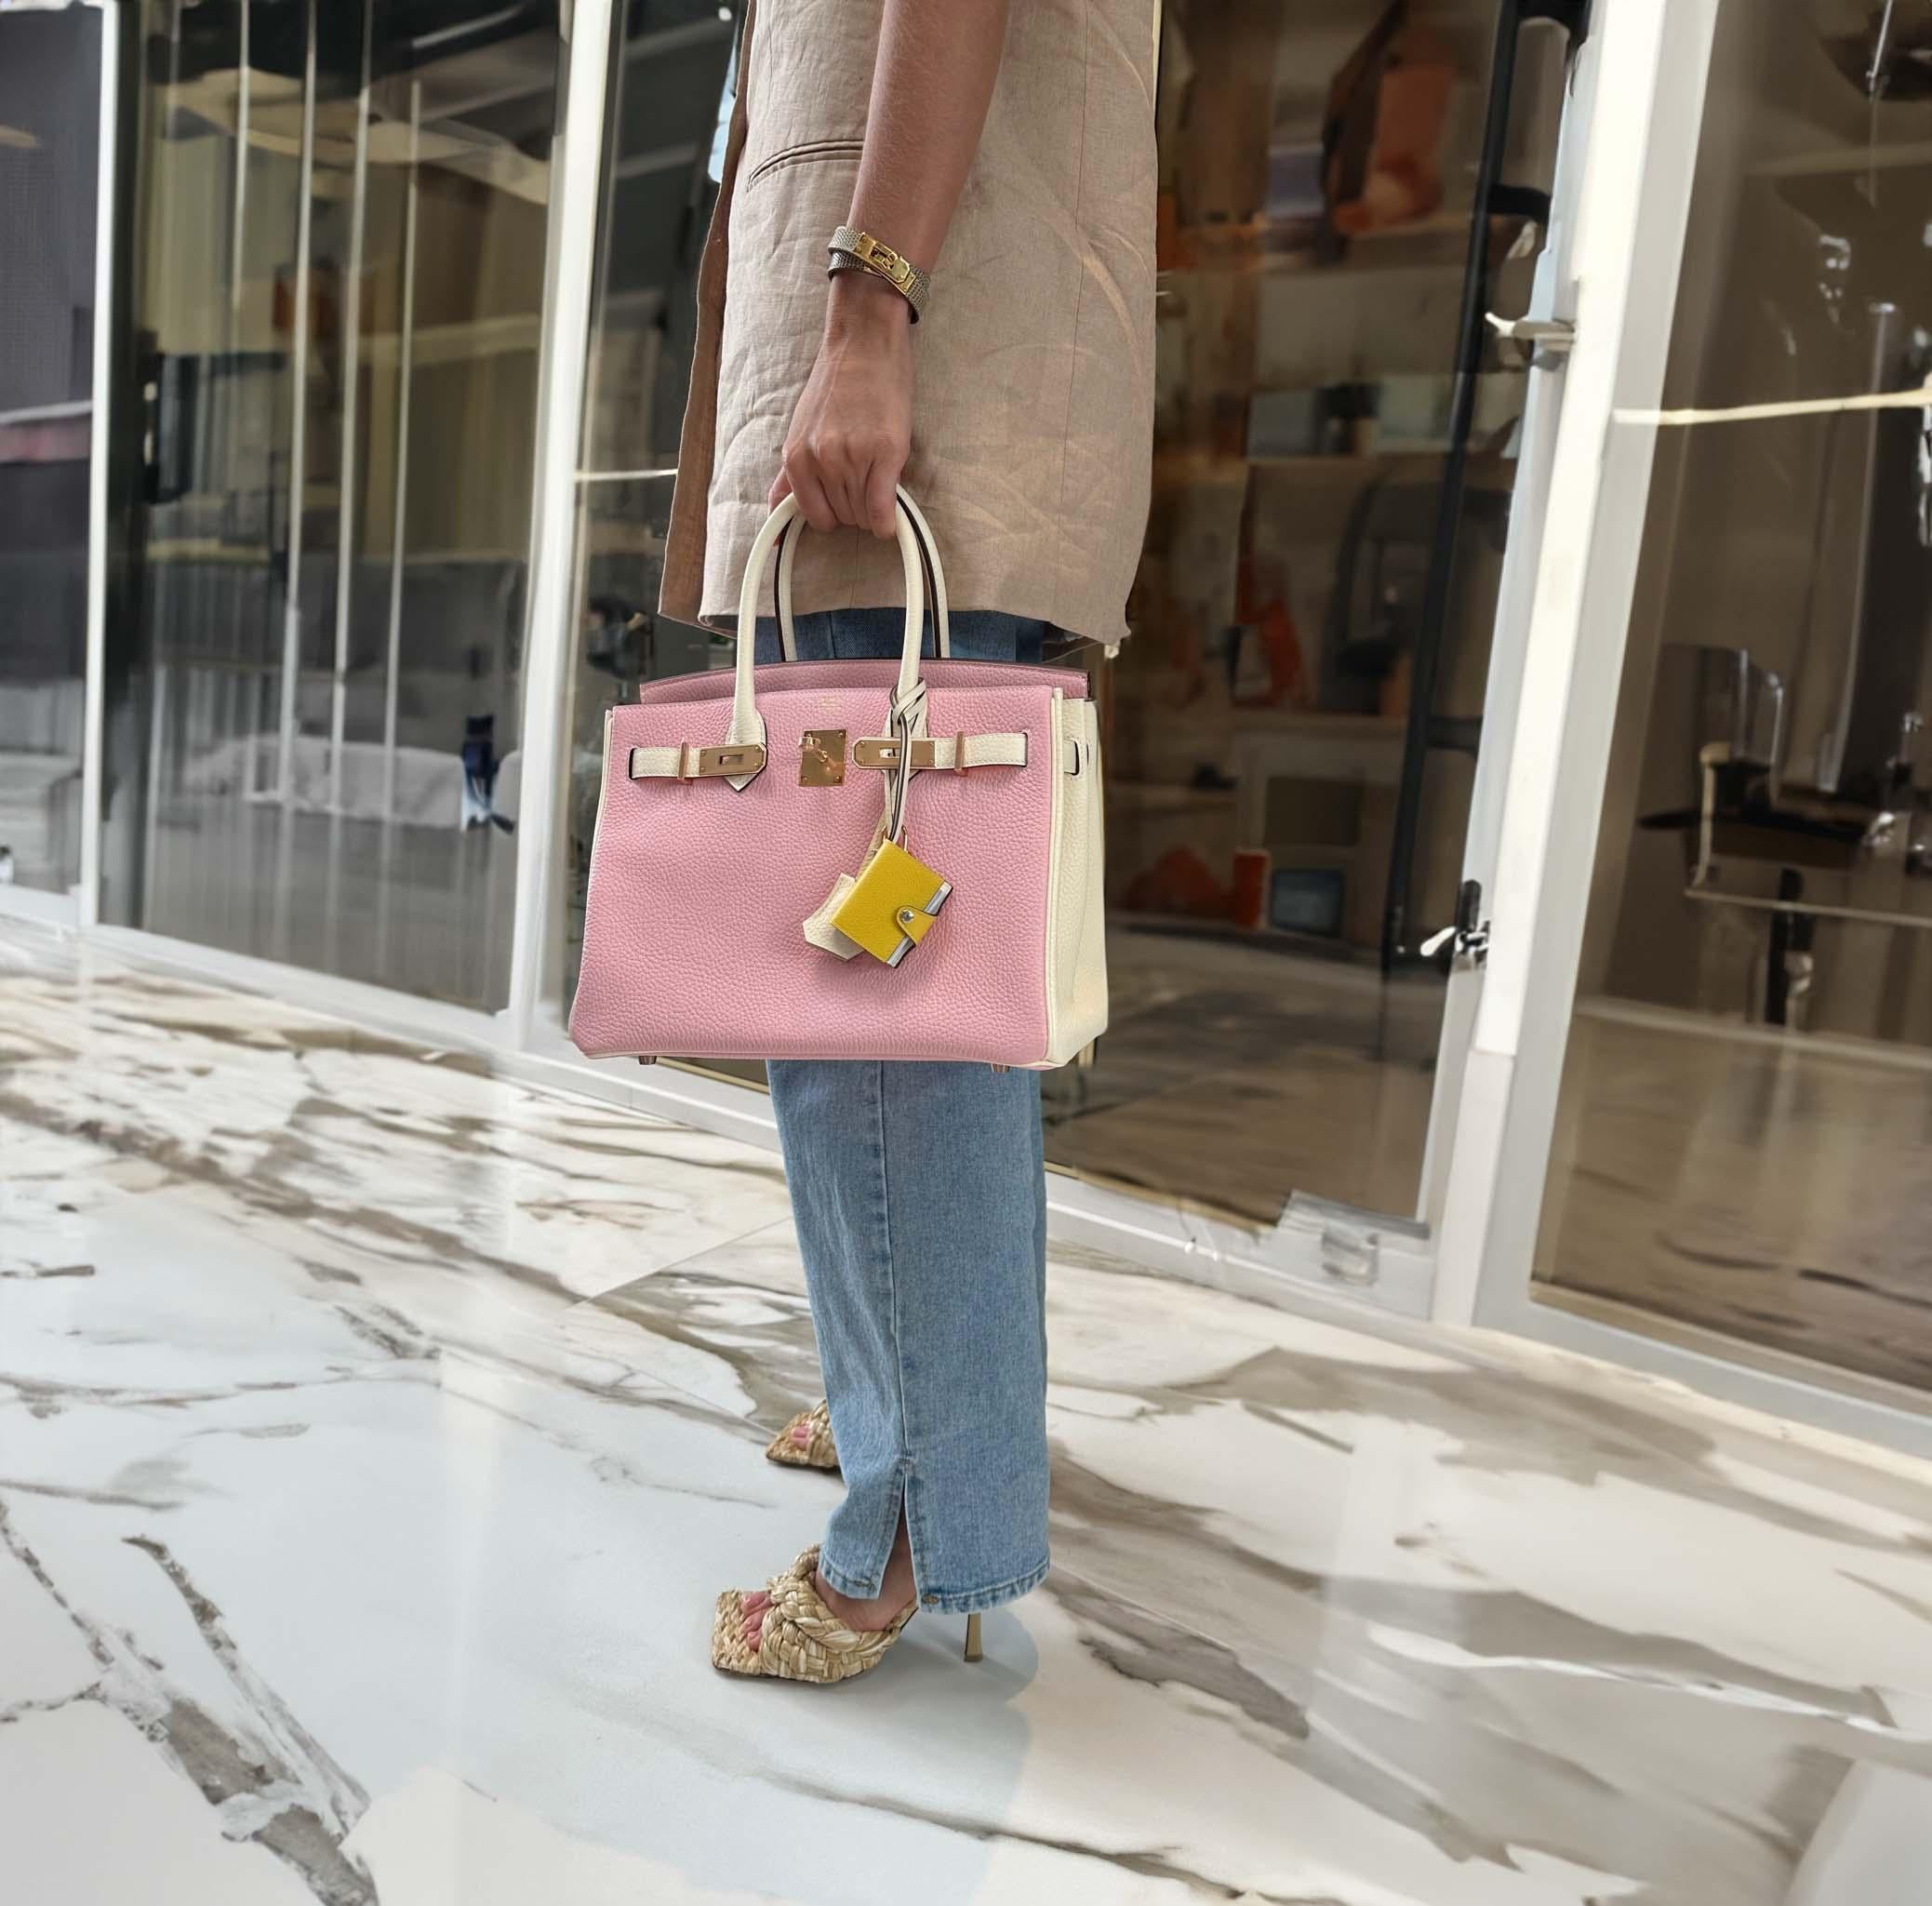 Hermès HSS Birkin 30 Rose Sakura and Craie Clemence with Rose Gold Hardware

The HorseShoe Stamp (HSS) Birkin from Hermès epitomizes the pinnacle of unparalleled luxury and exclusivity. This highly sought-after accessory is accessible solely to an